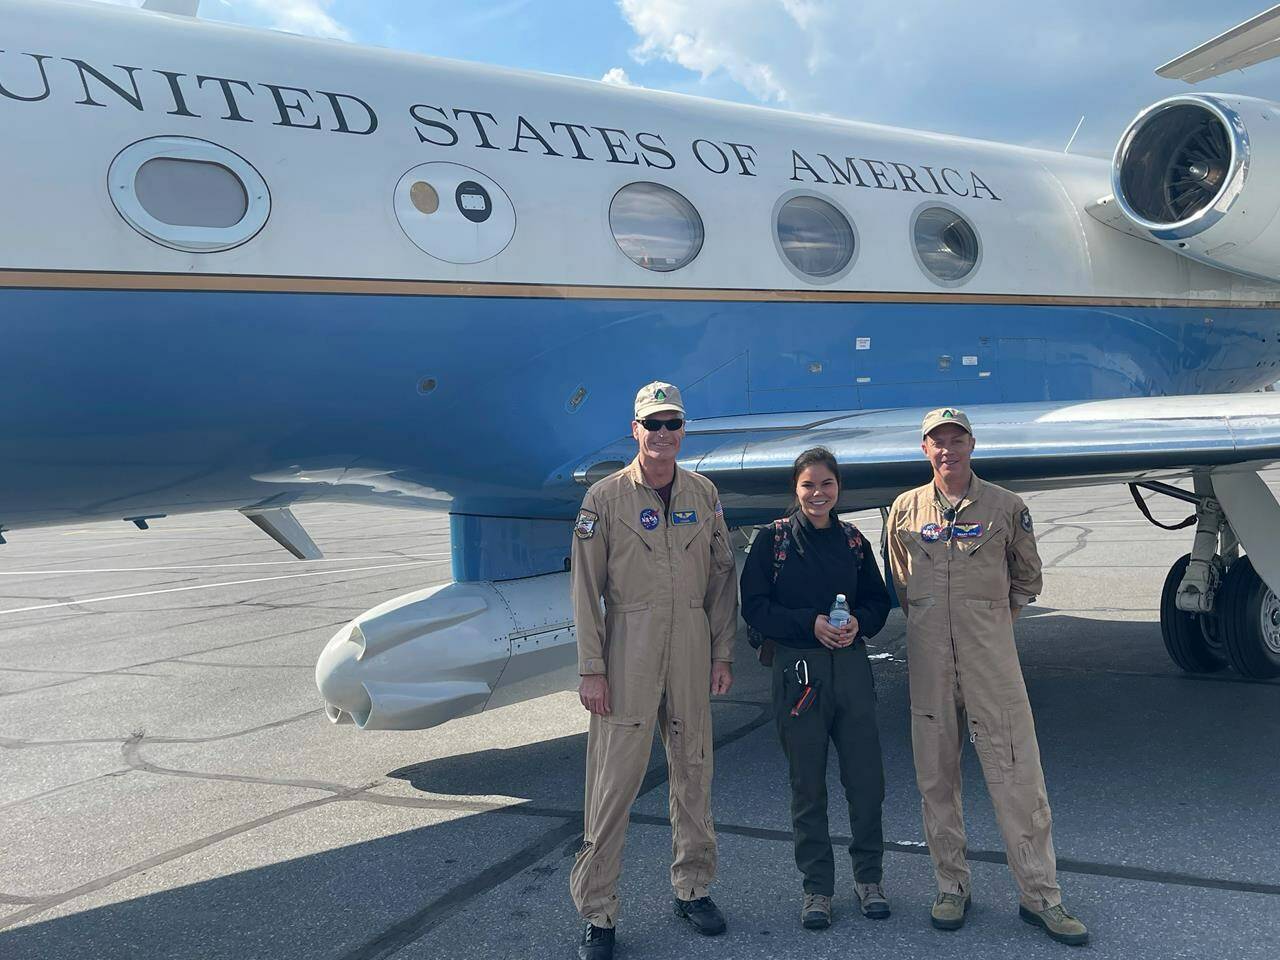 Two Northwest Territories youth joined NASA researchers aboard a Gulfstream III jet earlier this month as they soared above Great Slave Lake and parts of of Nunavut and Alberta. Jacki Moore-Tsetta stands with NASA’s Greg Nelson (left) and Shawn Kern (right) in front of the NASA aircraft in this handout photo. THE CANADIAN PRESS/HO-Jacki Moore-Tsetta